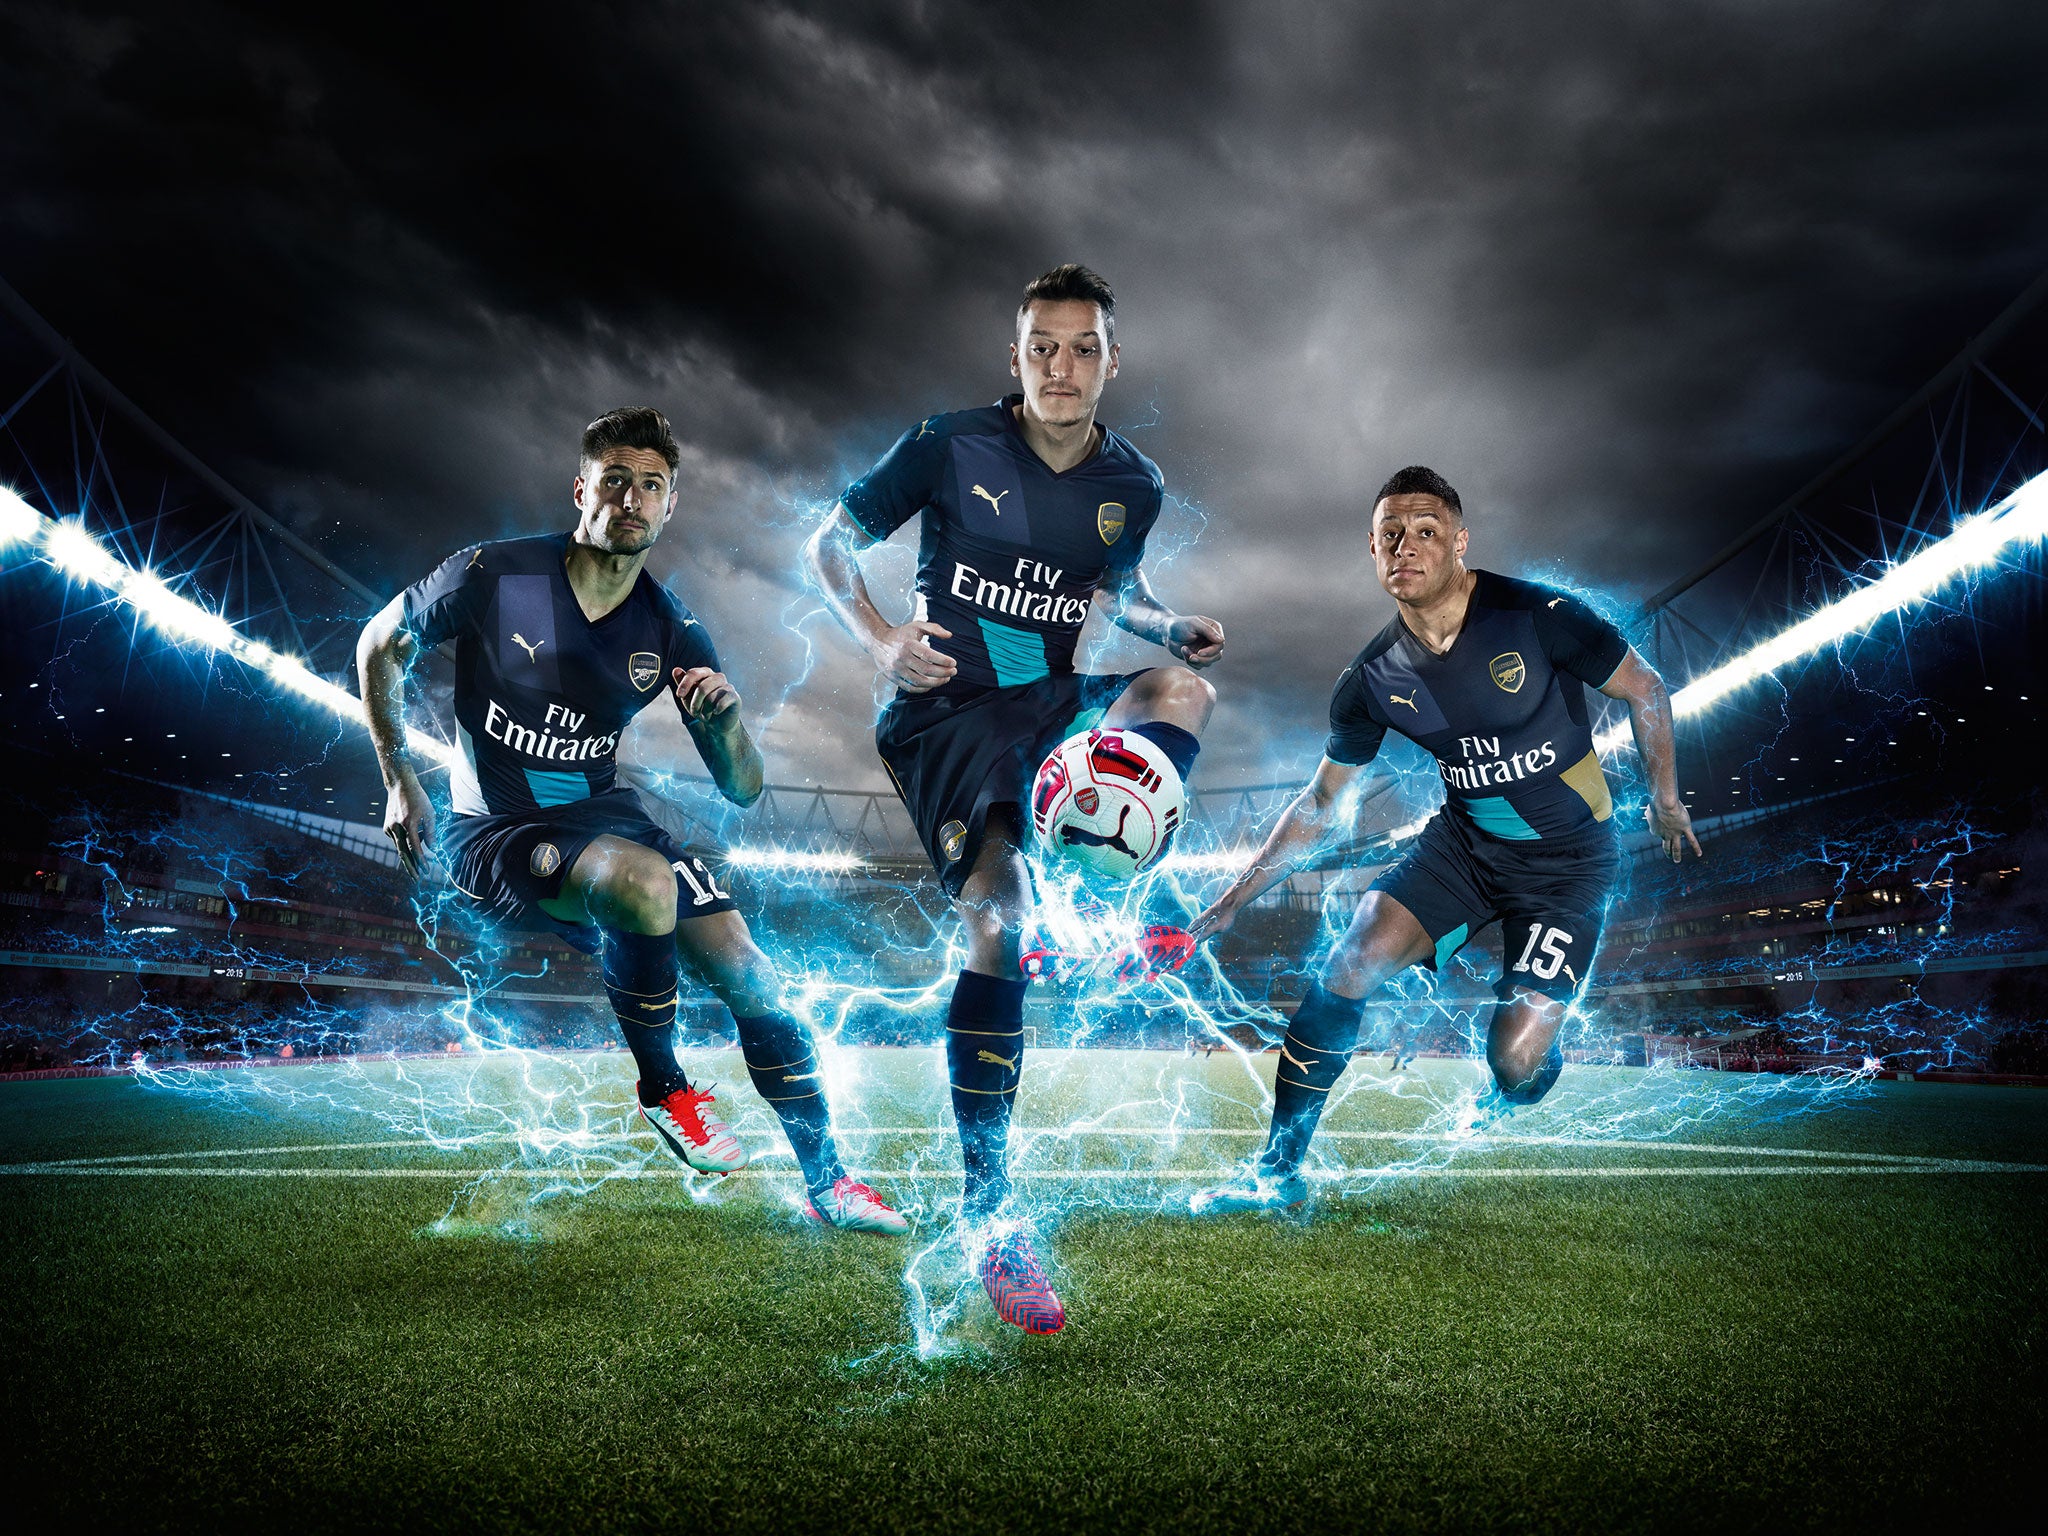 Olivier Giroud, Mesut Ozil and Alex Oxlade-Chamberlain in the shirt